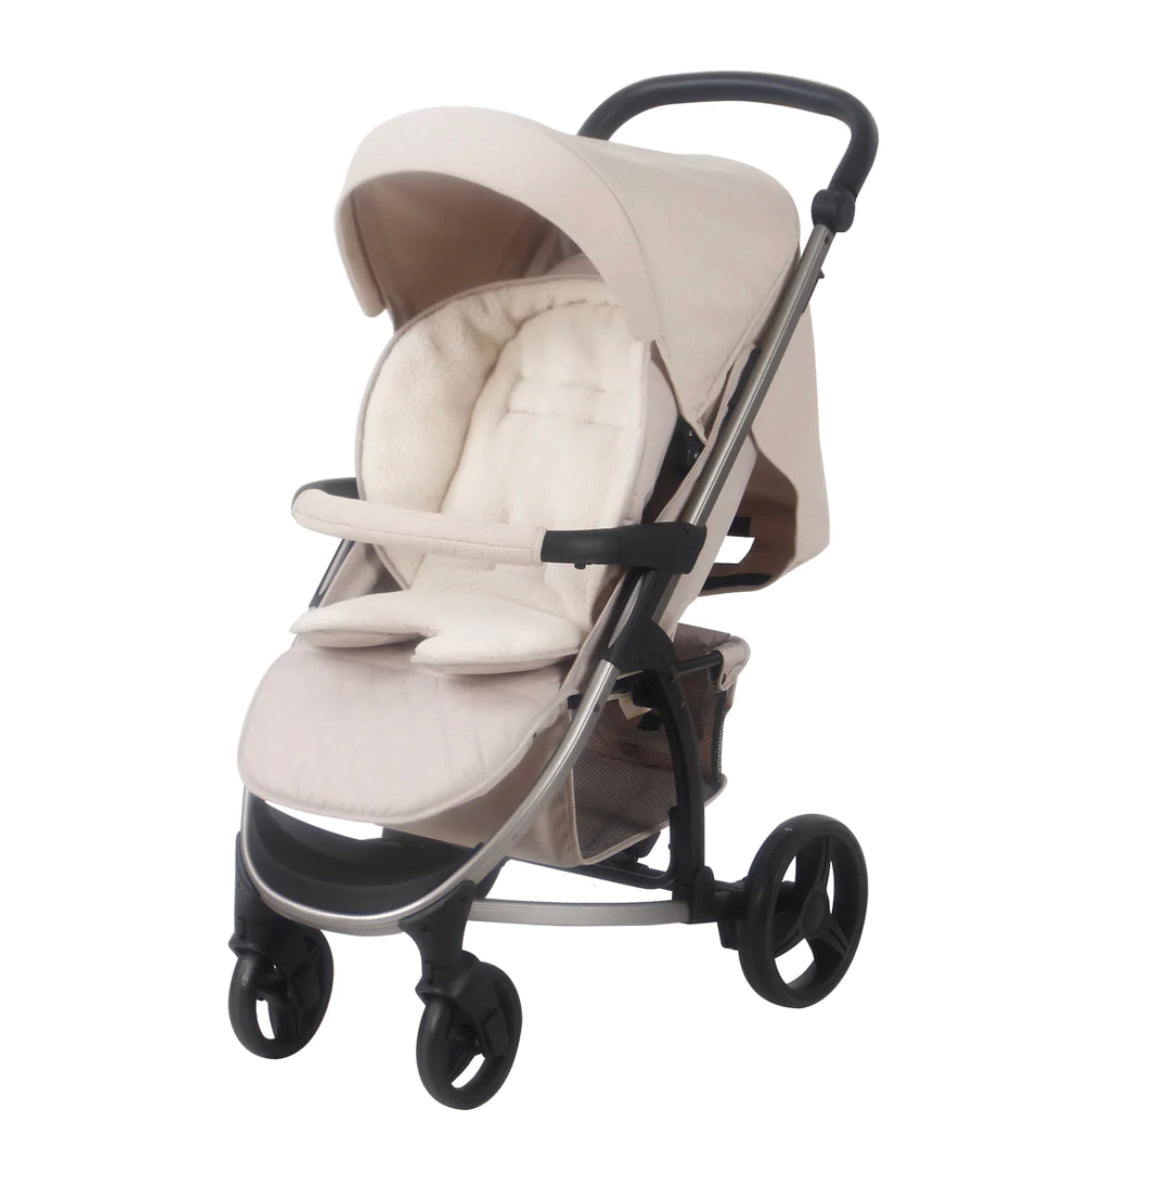 MB200i Billie Faiers Oatmeal iSize Travel System